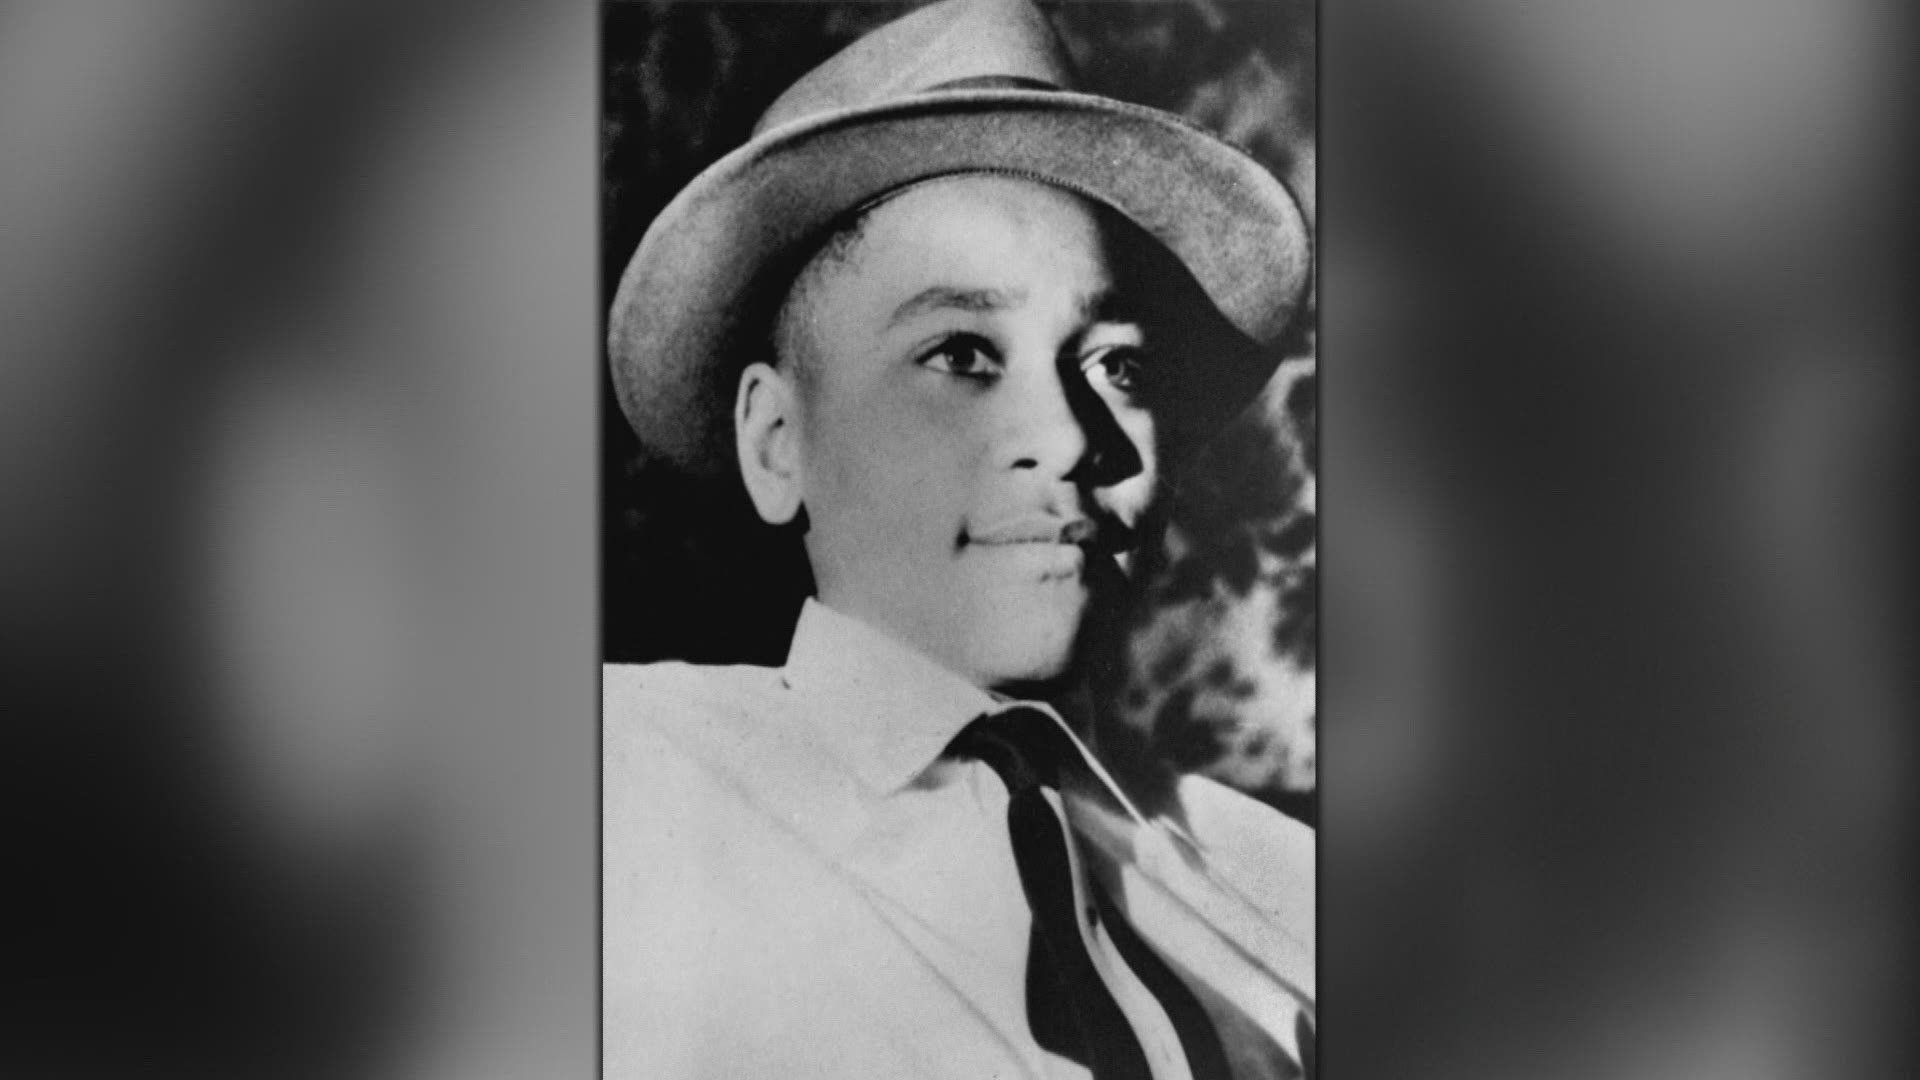 The case of the killing of Emmett Till will be reopened.